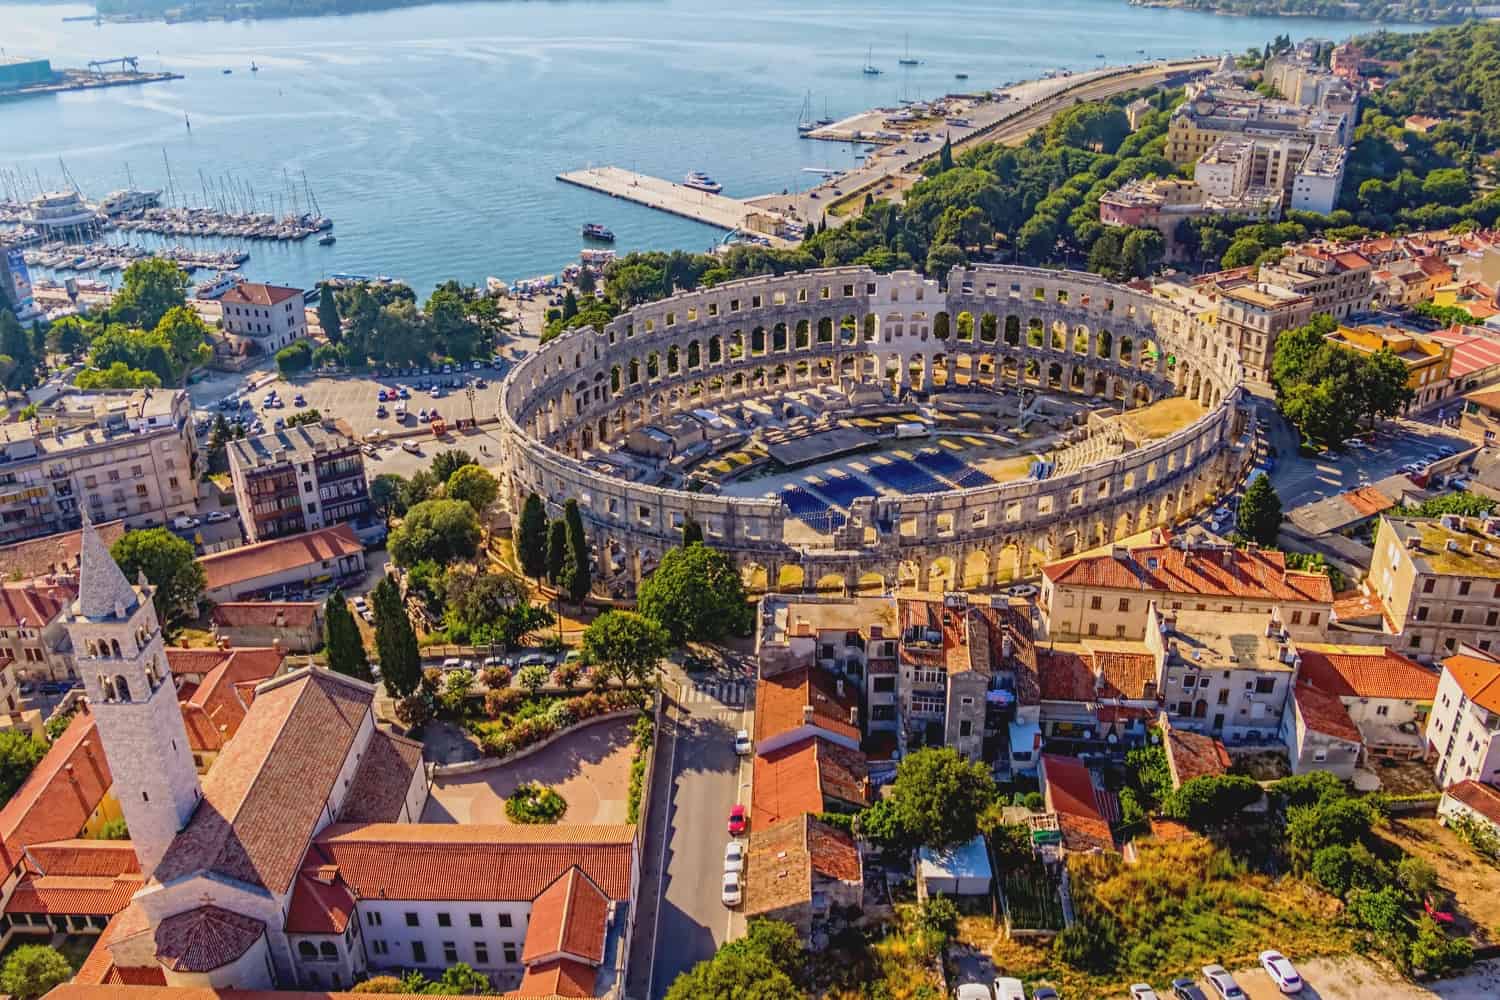 Pula's Roman amphitheatre from above, with red-roofed buildings surrounding it, a church spire visible in front, and a harbour with yachts moored behind.